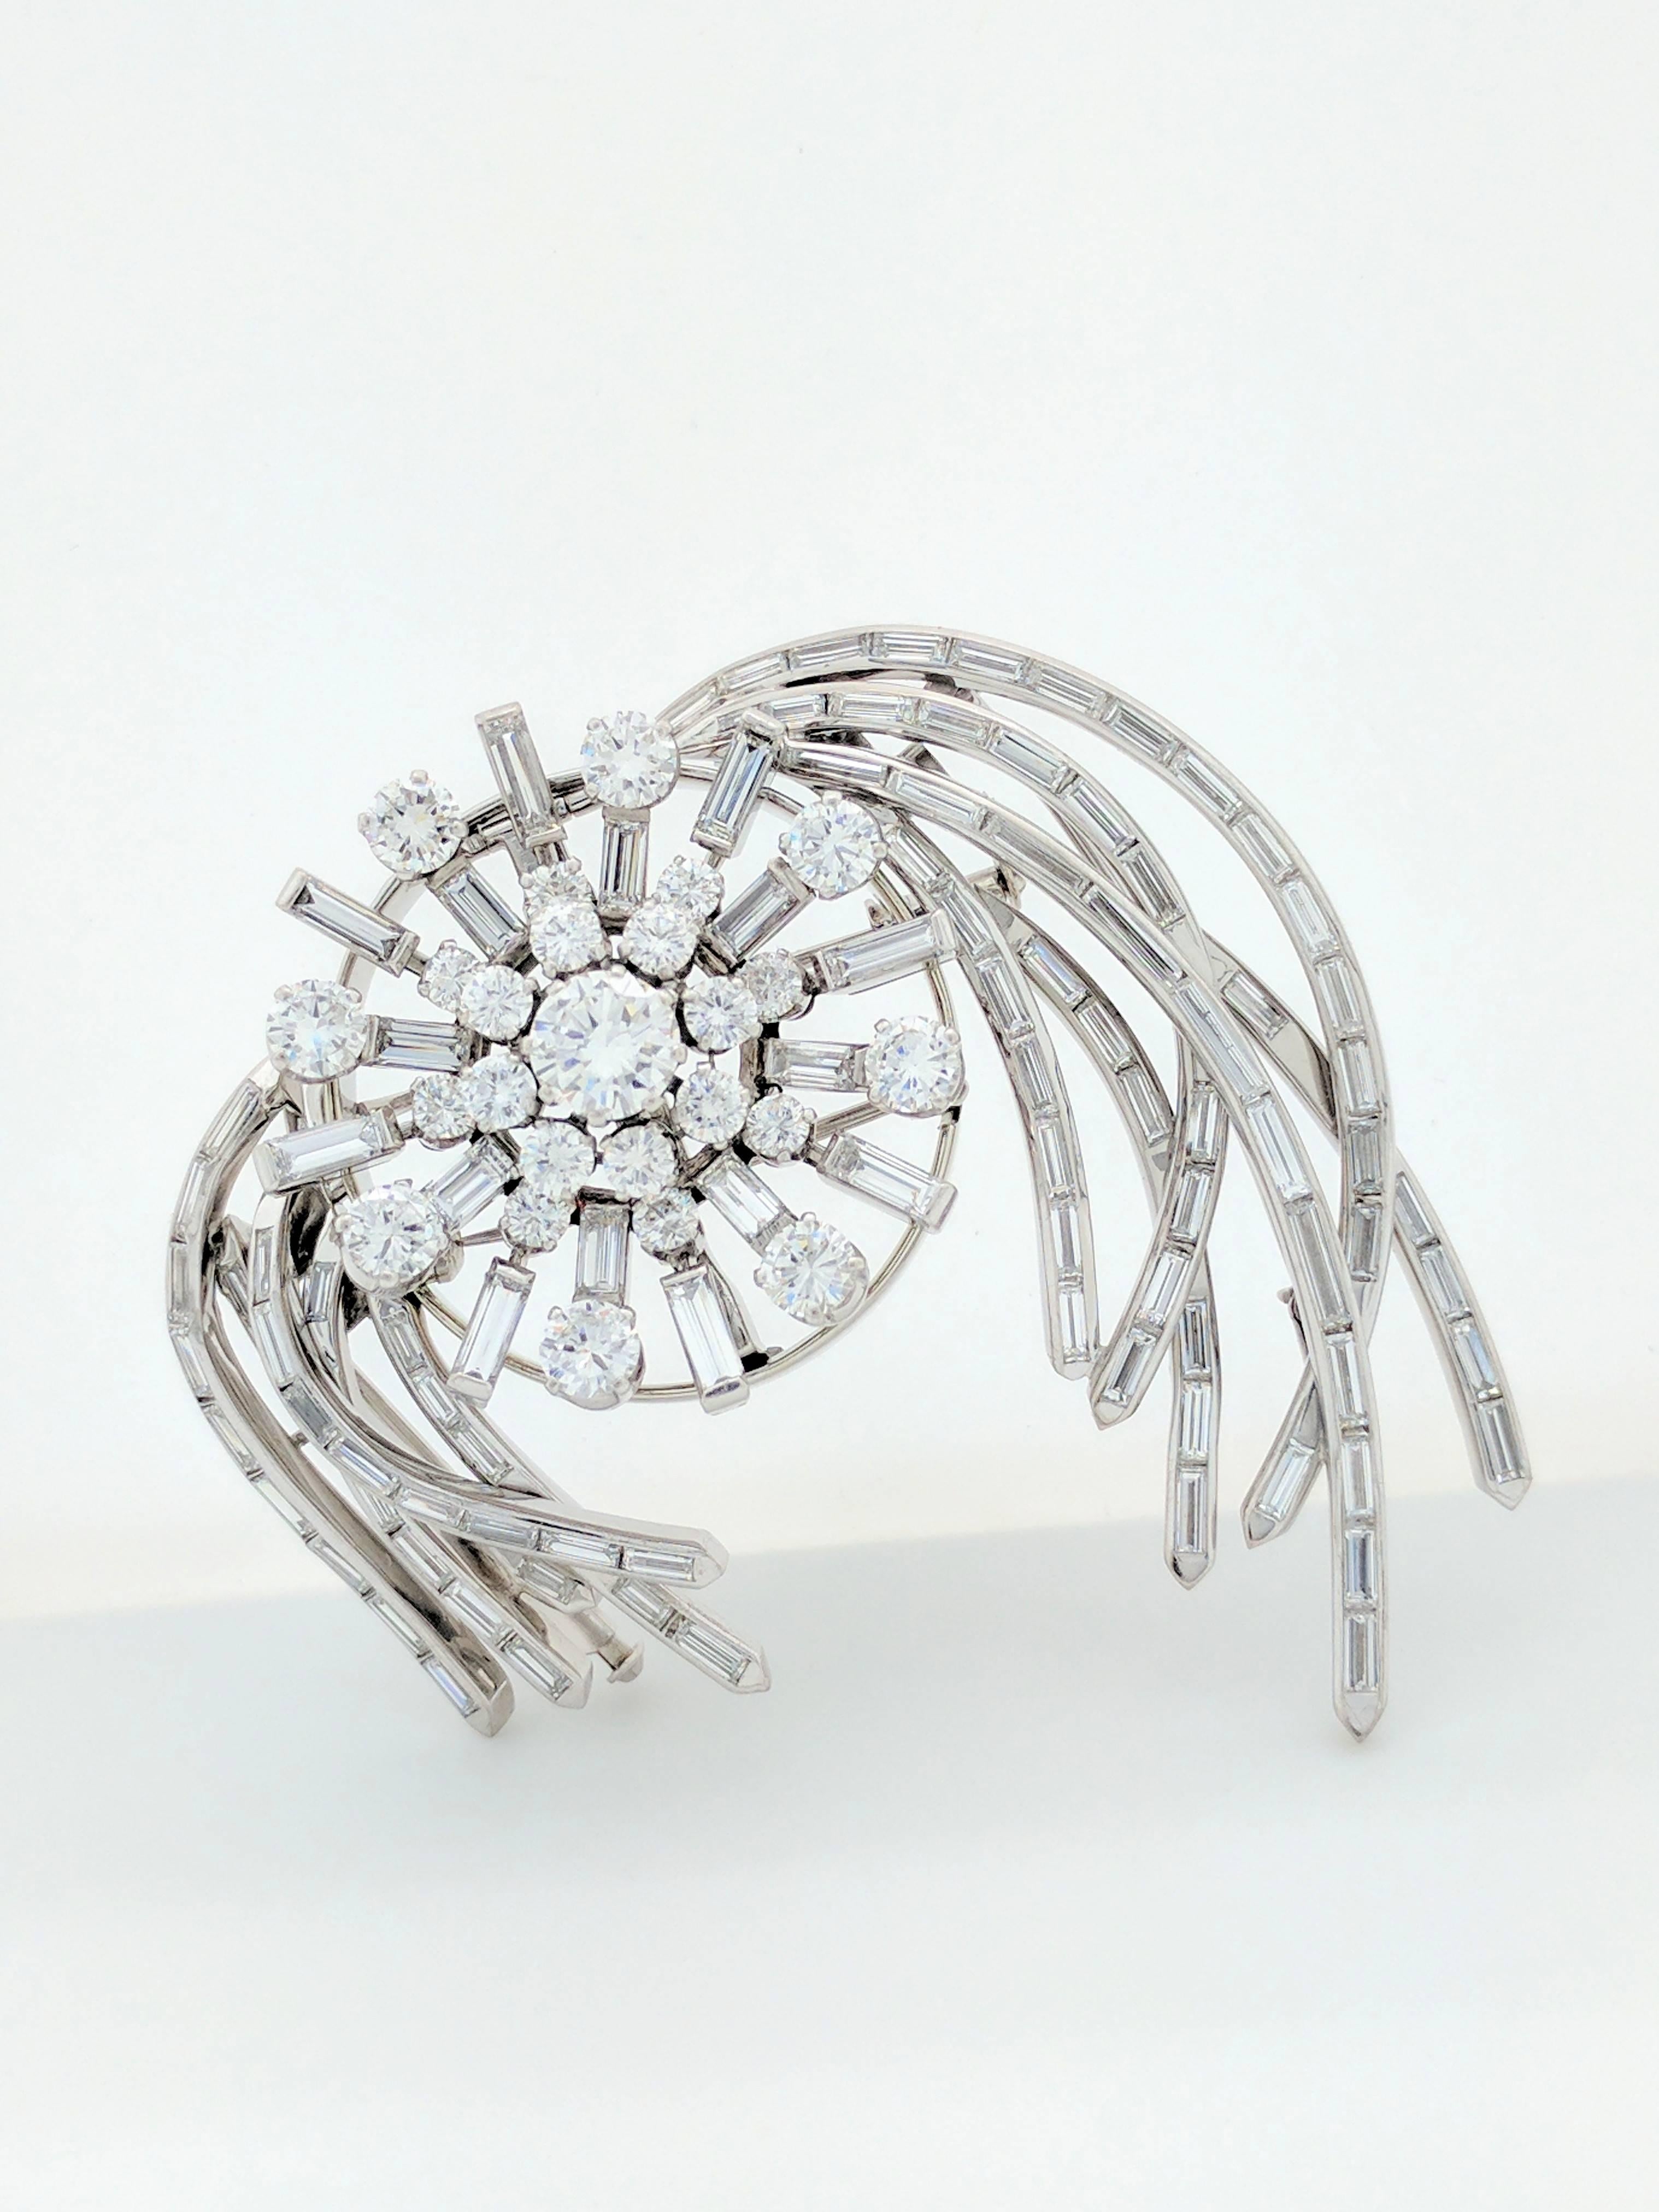 You are viewing a very stunning 1950s brooch/pin. This piece features the following diamonds:

Center: (1) Approx. 1.00ct Round Diamond

2nd Tier: (8) Approx. .10ct Round Diamonds

3rd Tier: (8) Approx. .07ct Round Diamonds

4th Tier: (8) Approx.